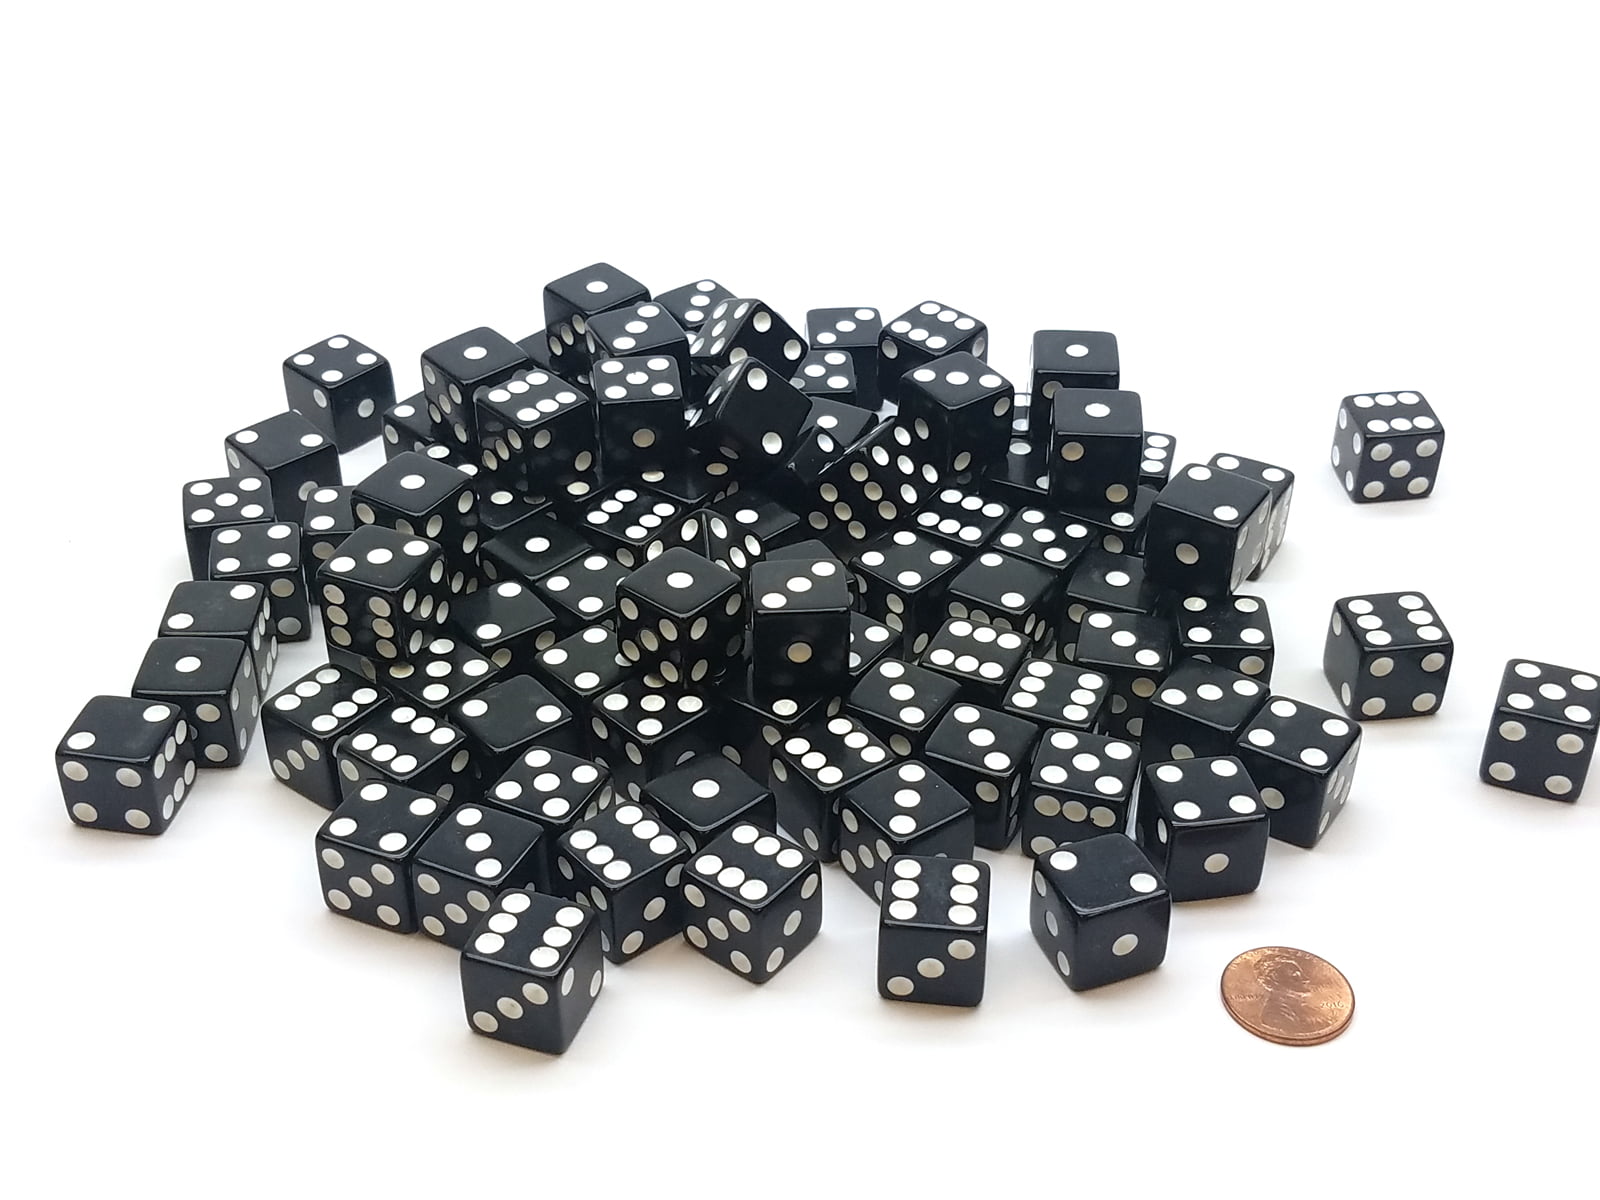 Set of 10 Six Sided Square Opaque 16mm D6 Dice Black with Red Pip Die